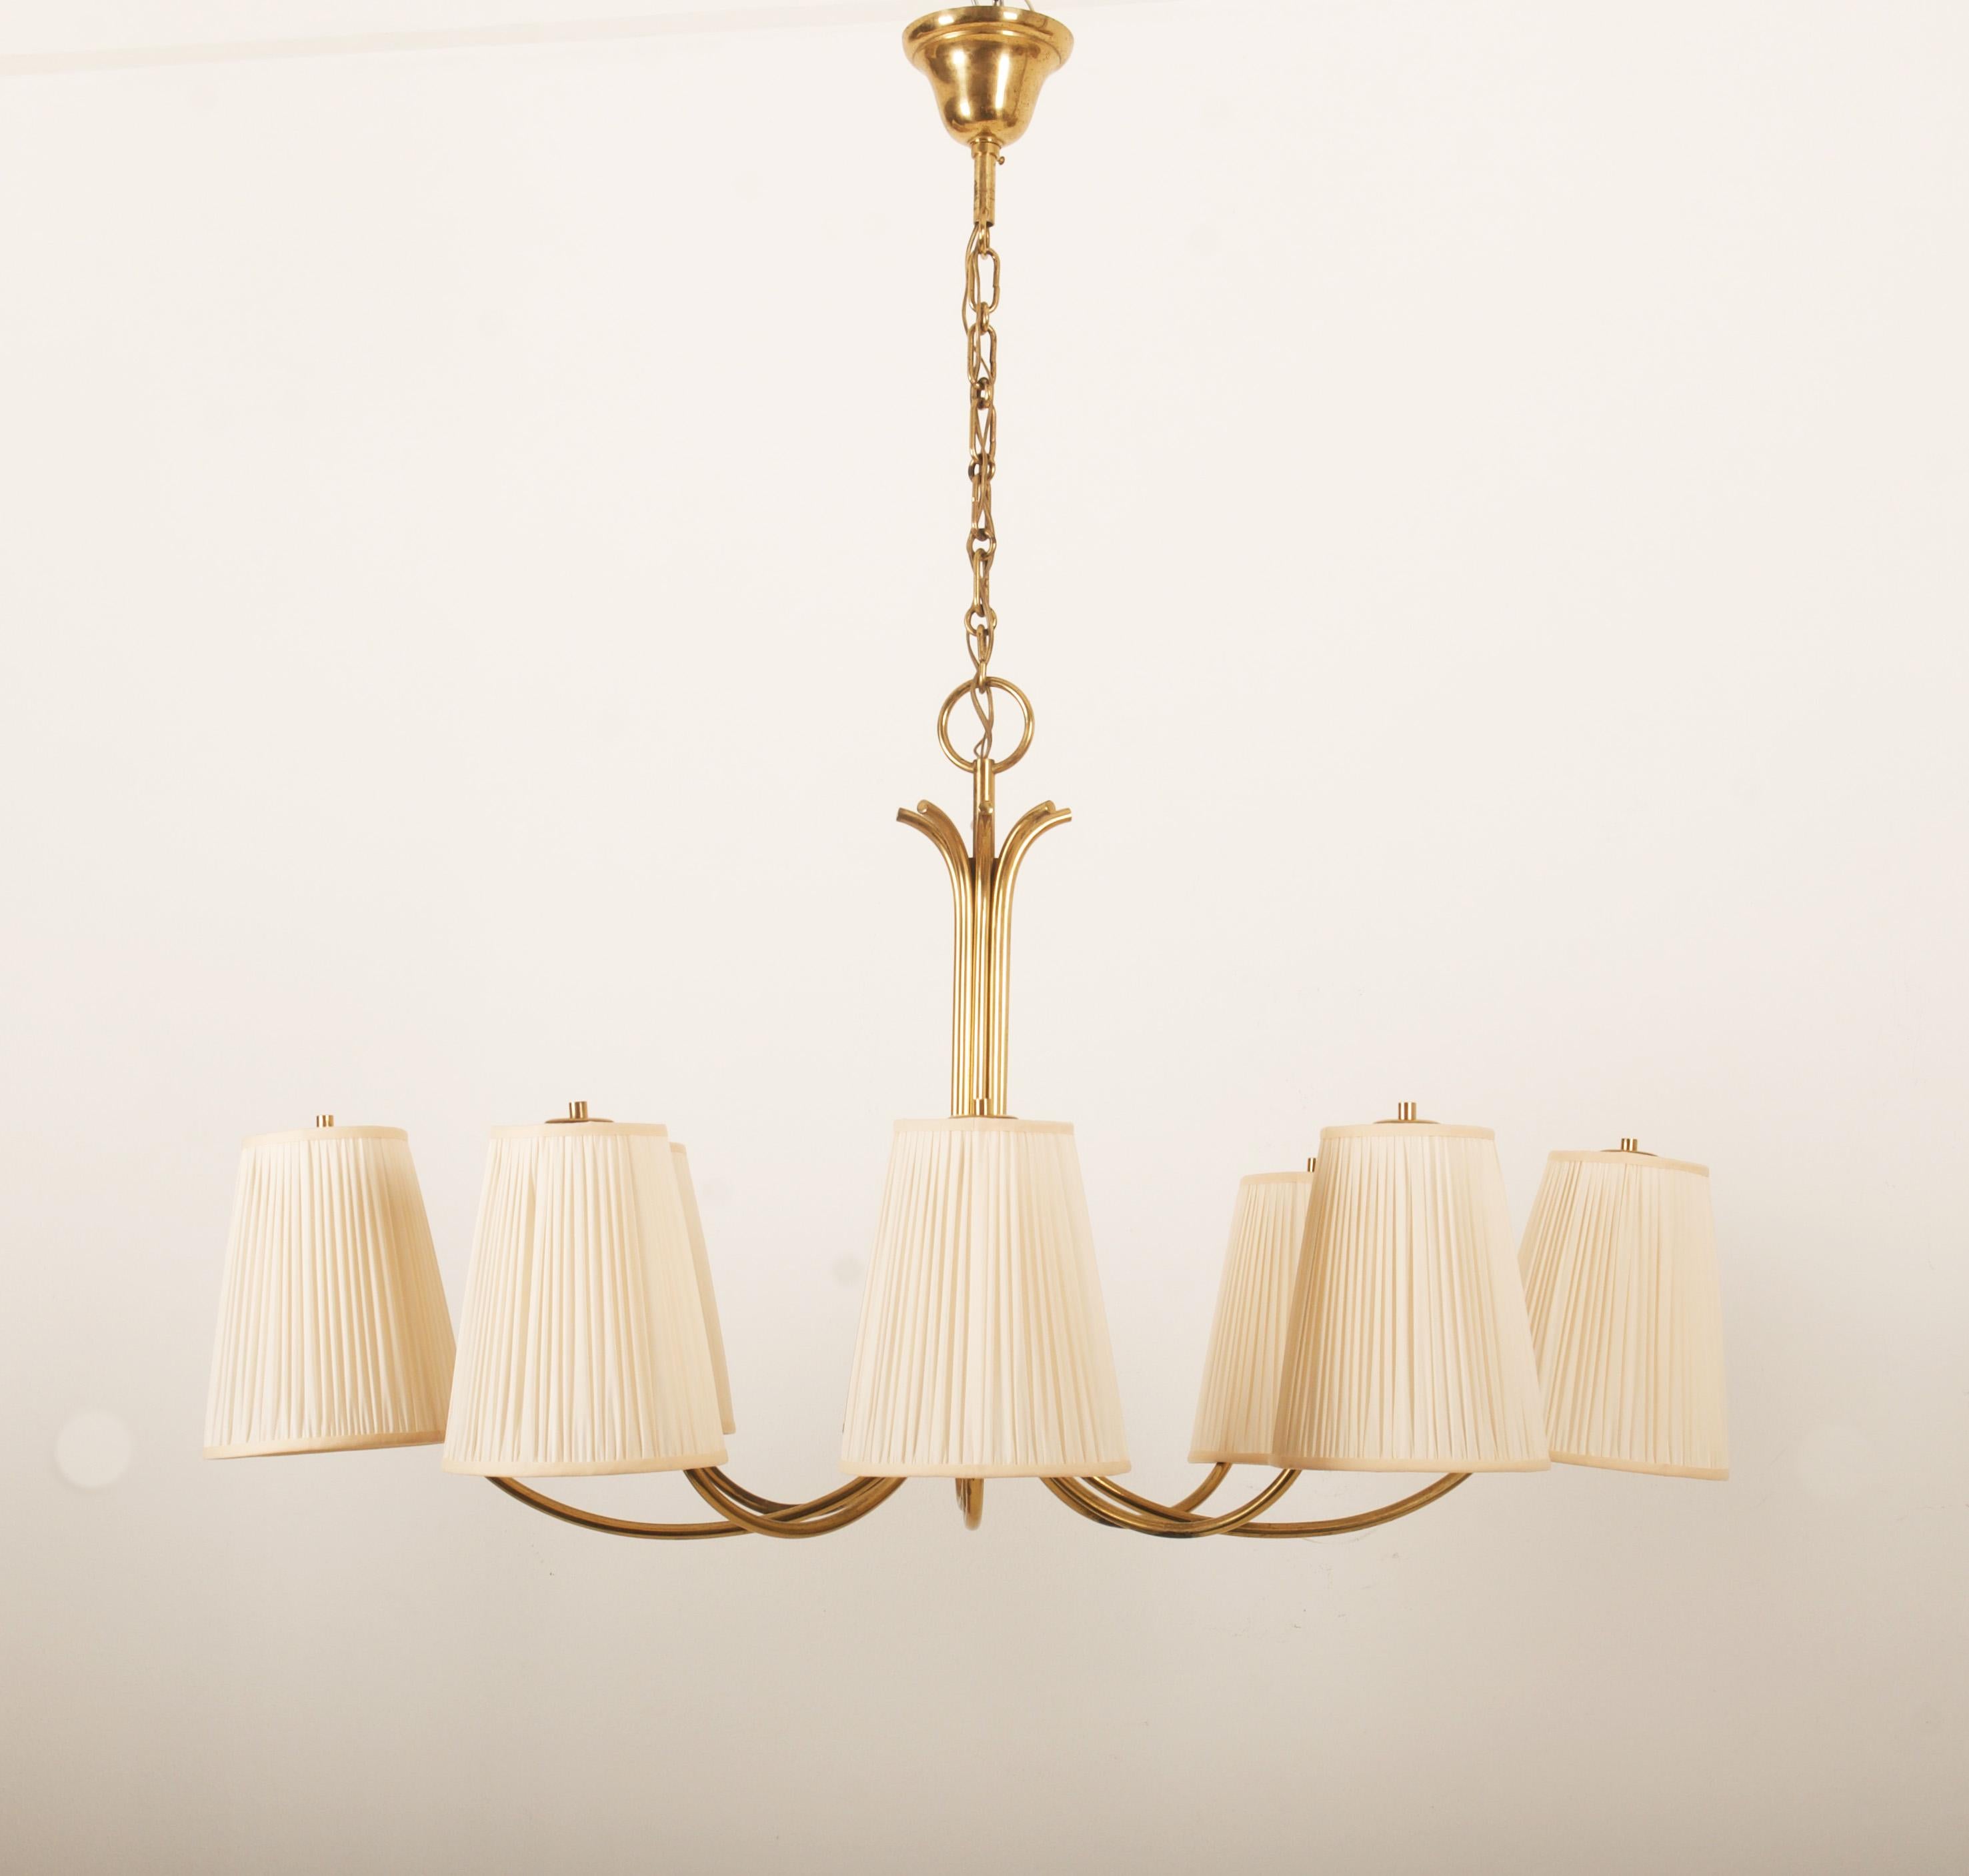 Rare Eight Arms Chandelier by Josef Frank for Kalmar For Sale 3